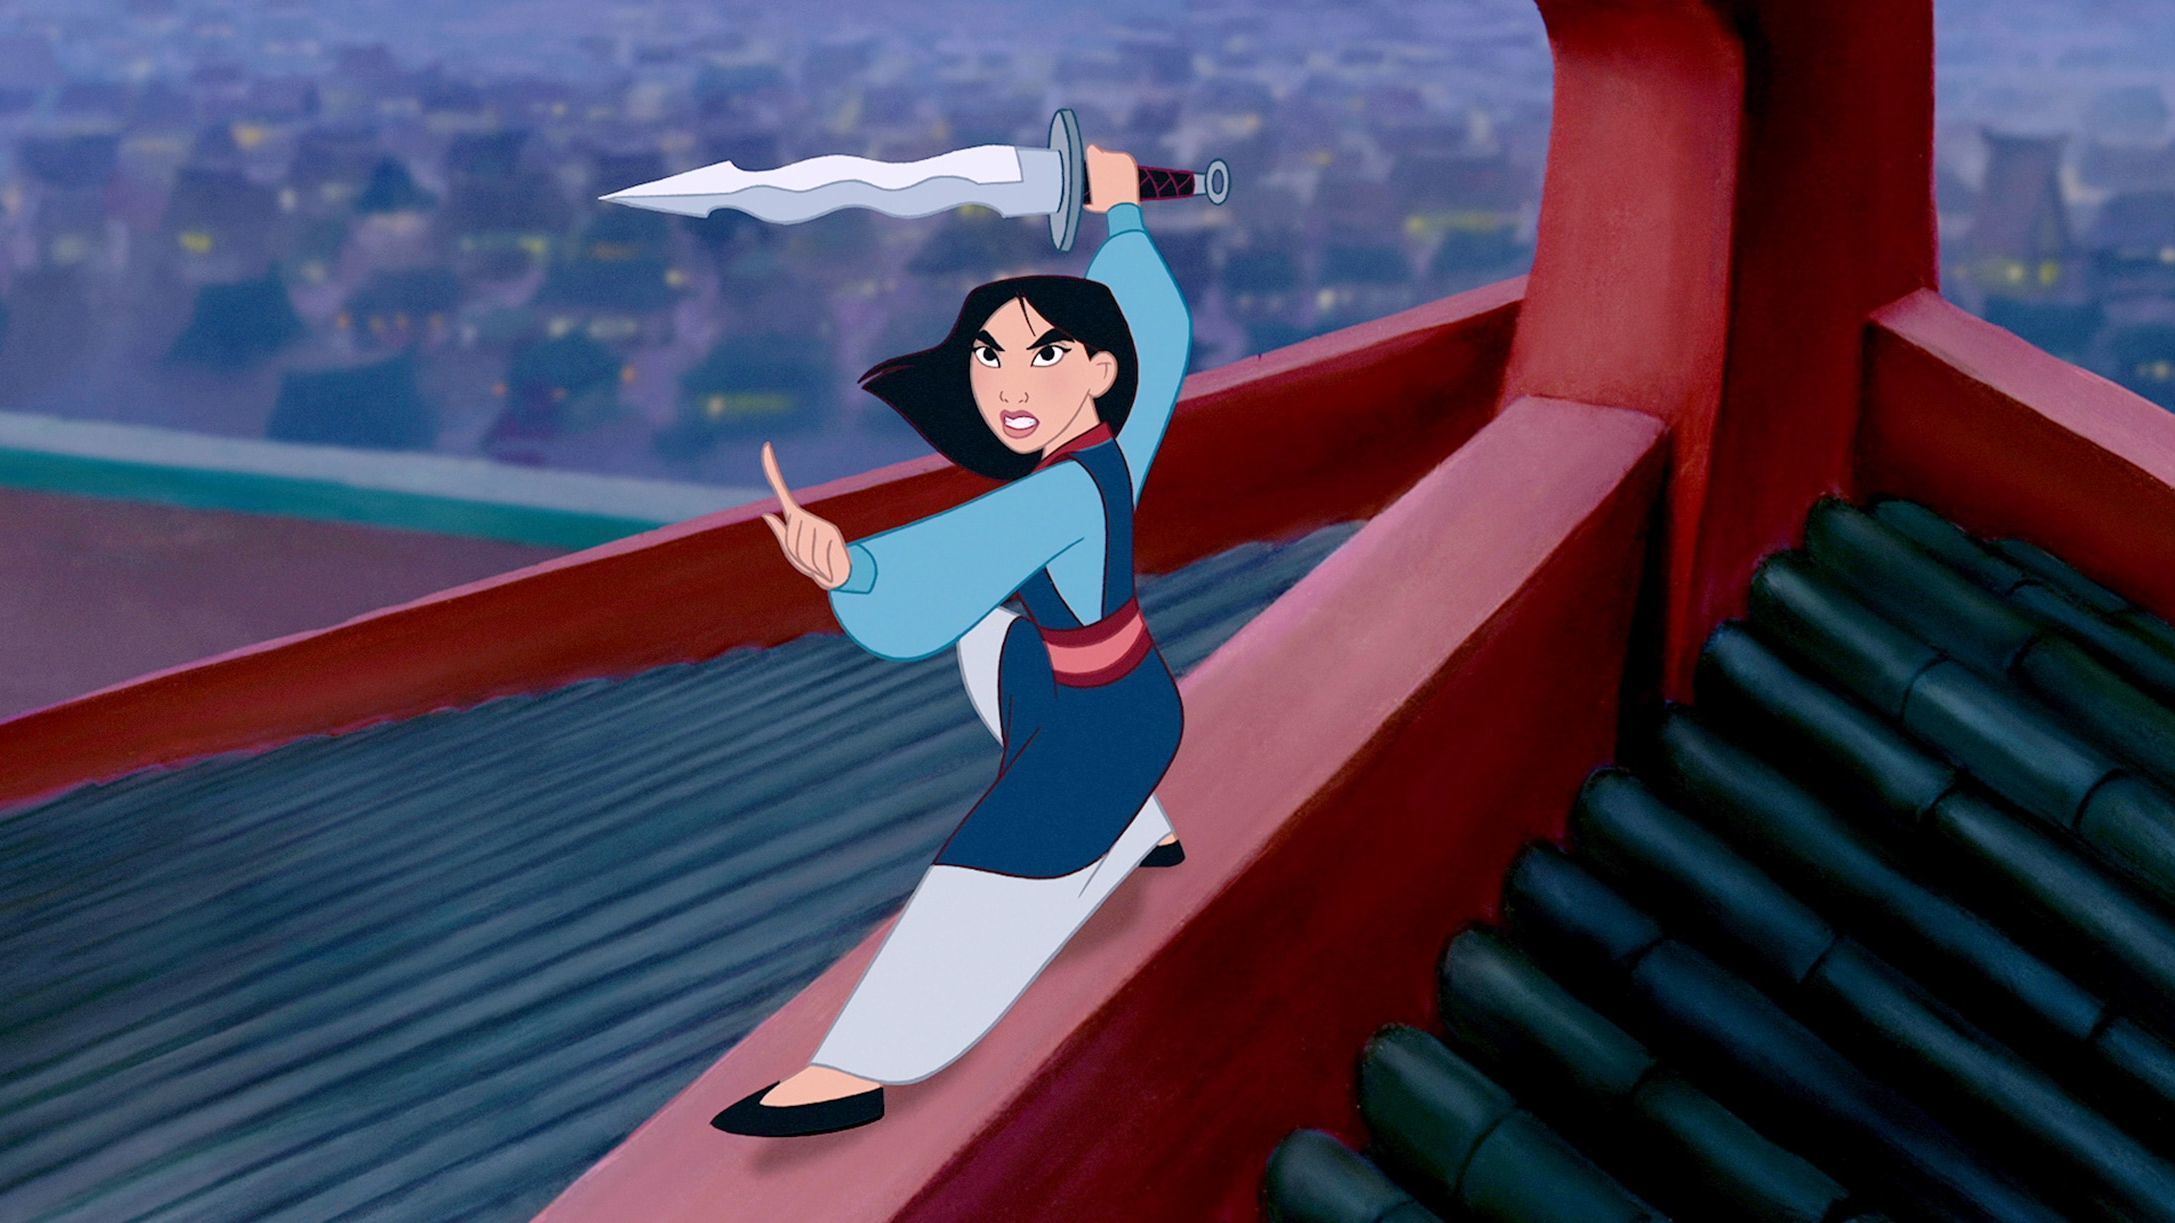 Mulan ready to battle and defeat Shan-Yu.